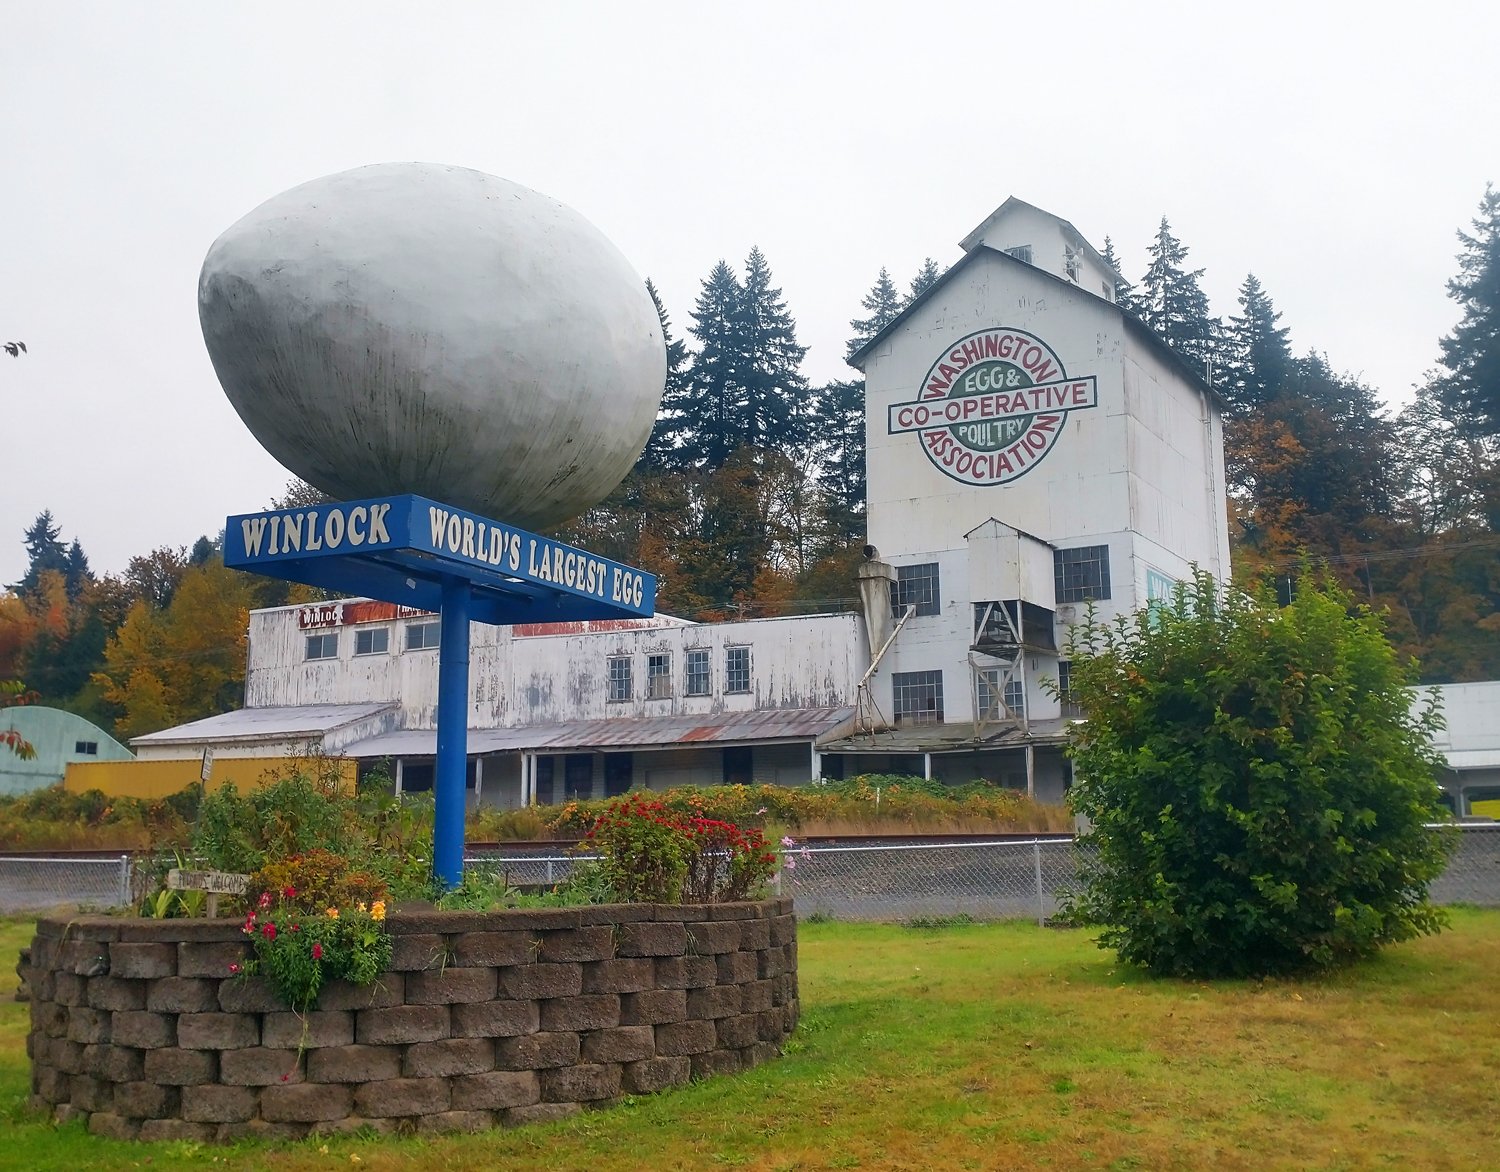 Supposedly largest egg, in Winlock, WA.